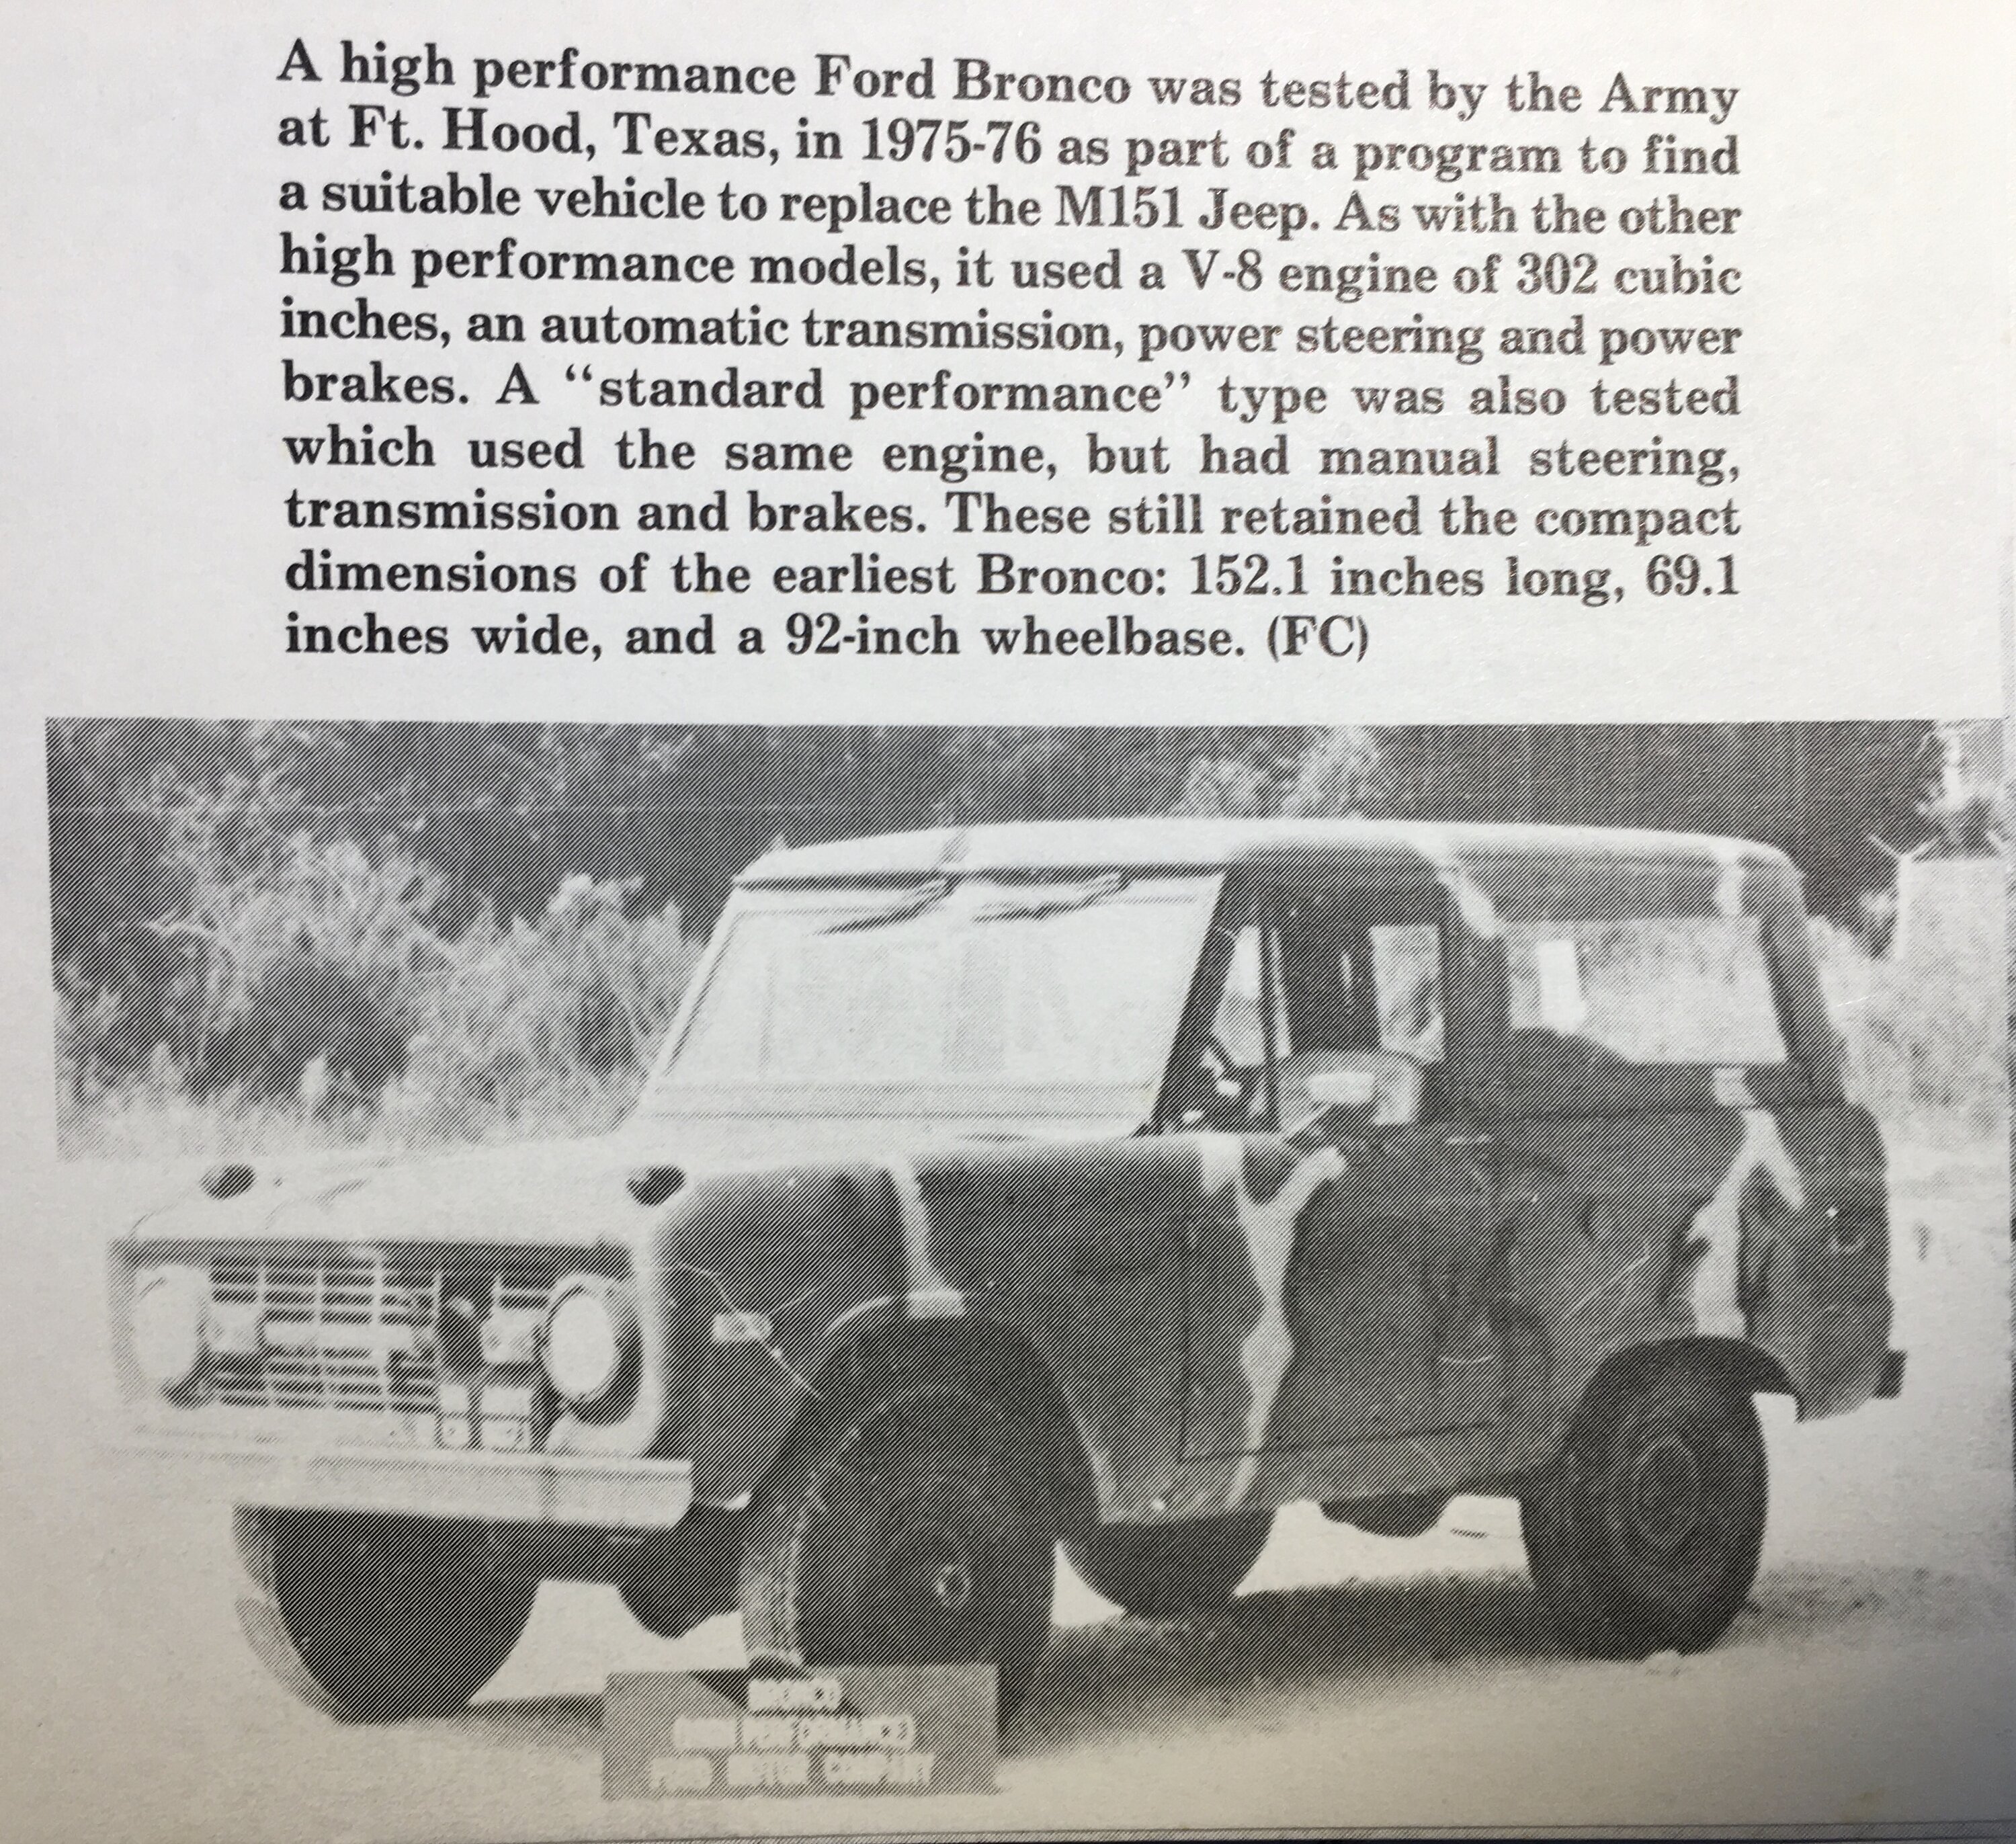 Ford Bronco U.S. Army tests the Bronco at Fort Hood E5928A6B-CBC0-42A8-B194-F1388D71BAC9